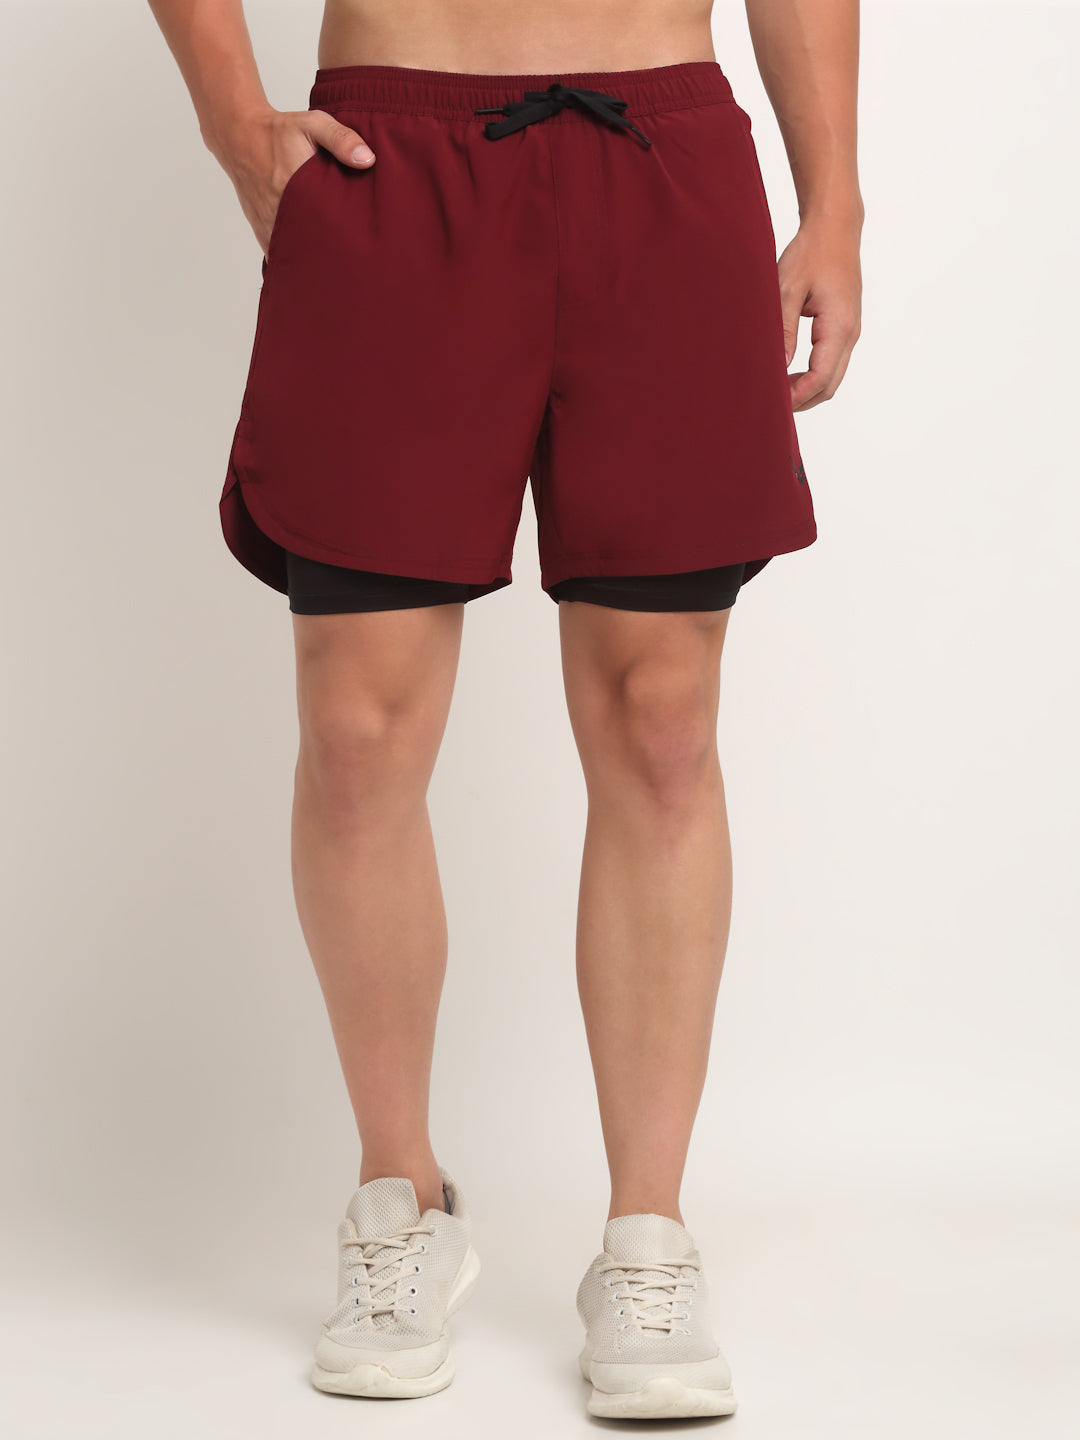 Invincible Men's Double Layered Shorts